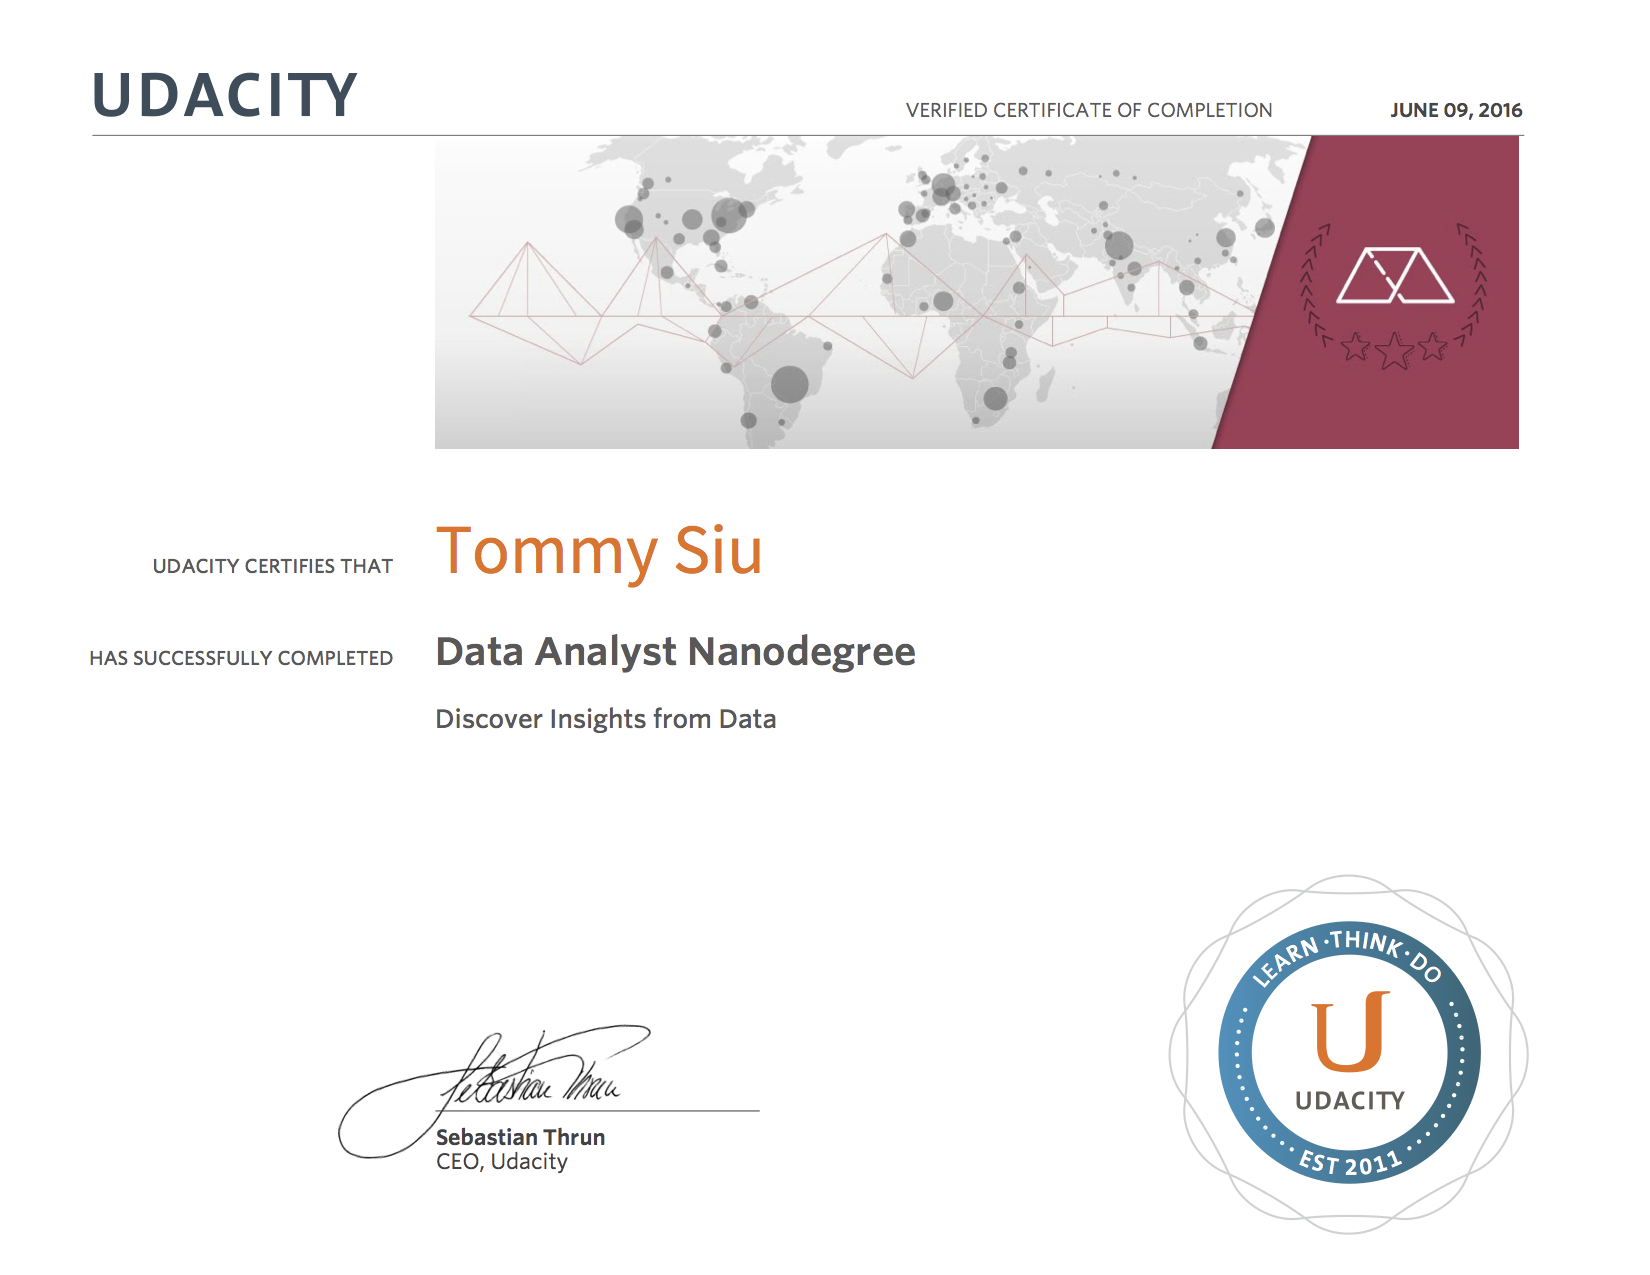 Udacity Nanodegree. Udacity data Analyst Nanodegree Certificate. Certificate of verification. Verified Certificate of completion.